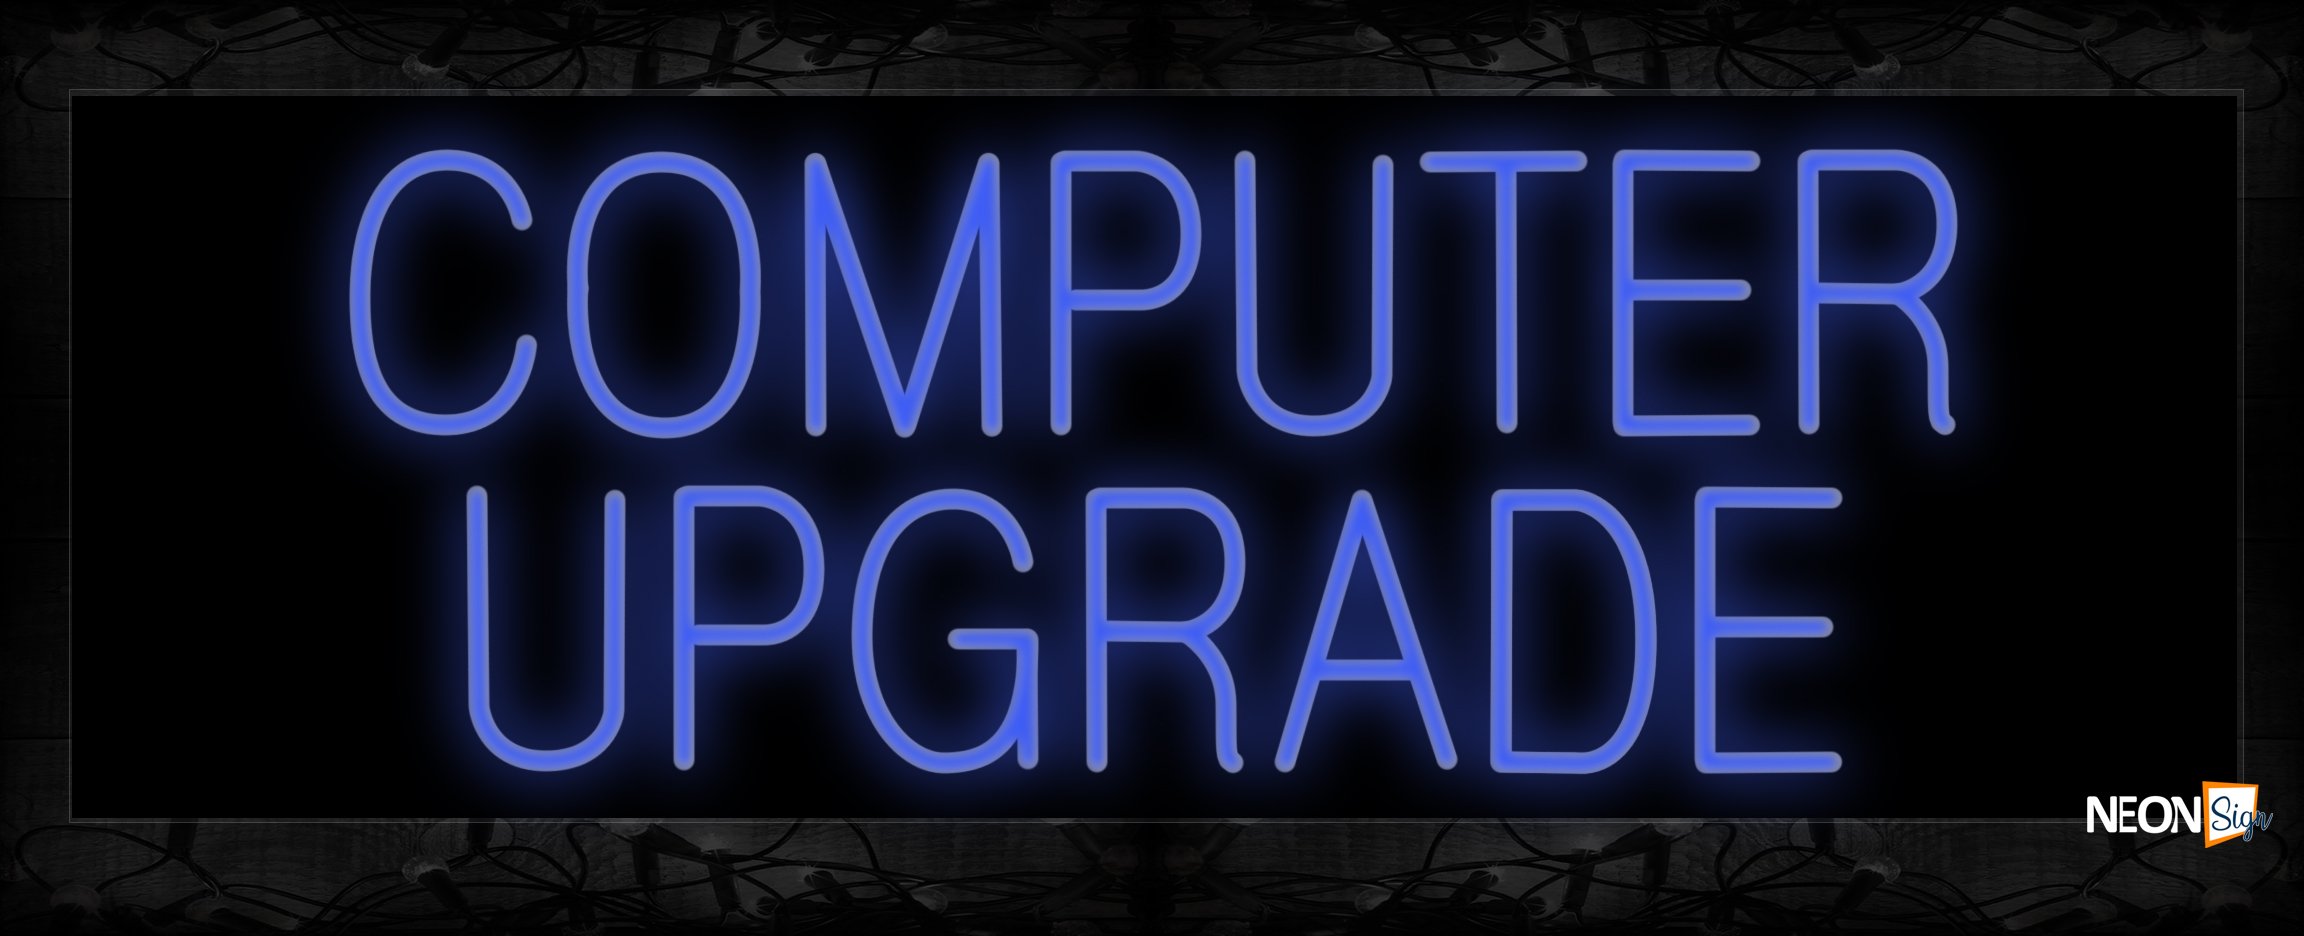 Image of 10223 Computer Upgrade Neon Sign 13x32 Black Backing